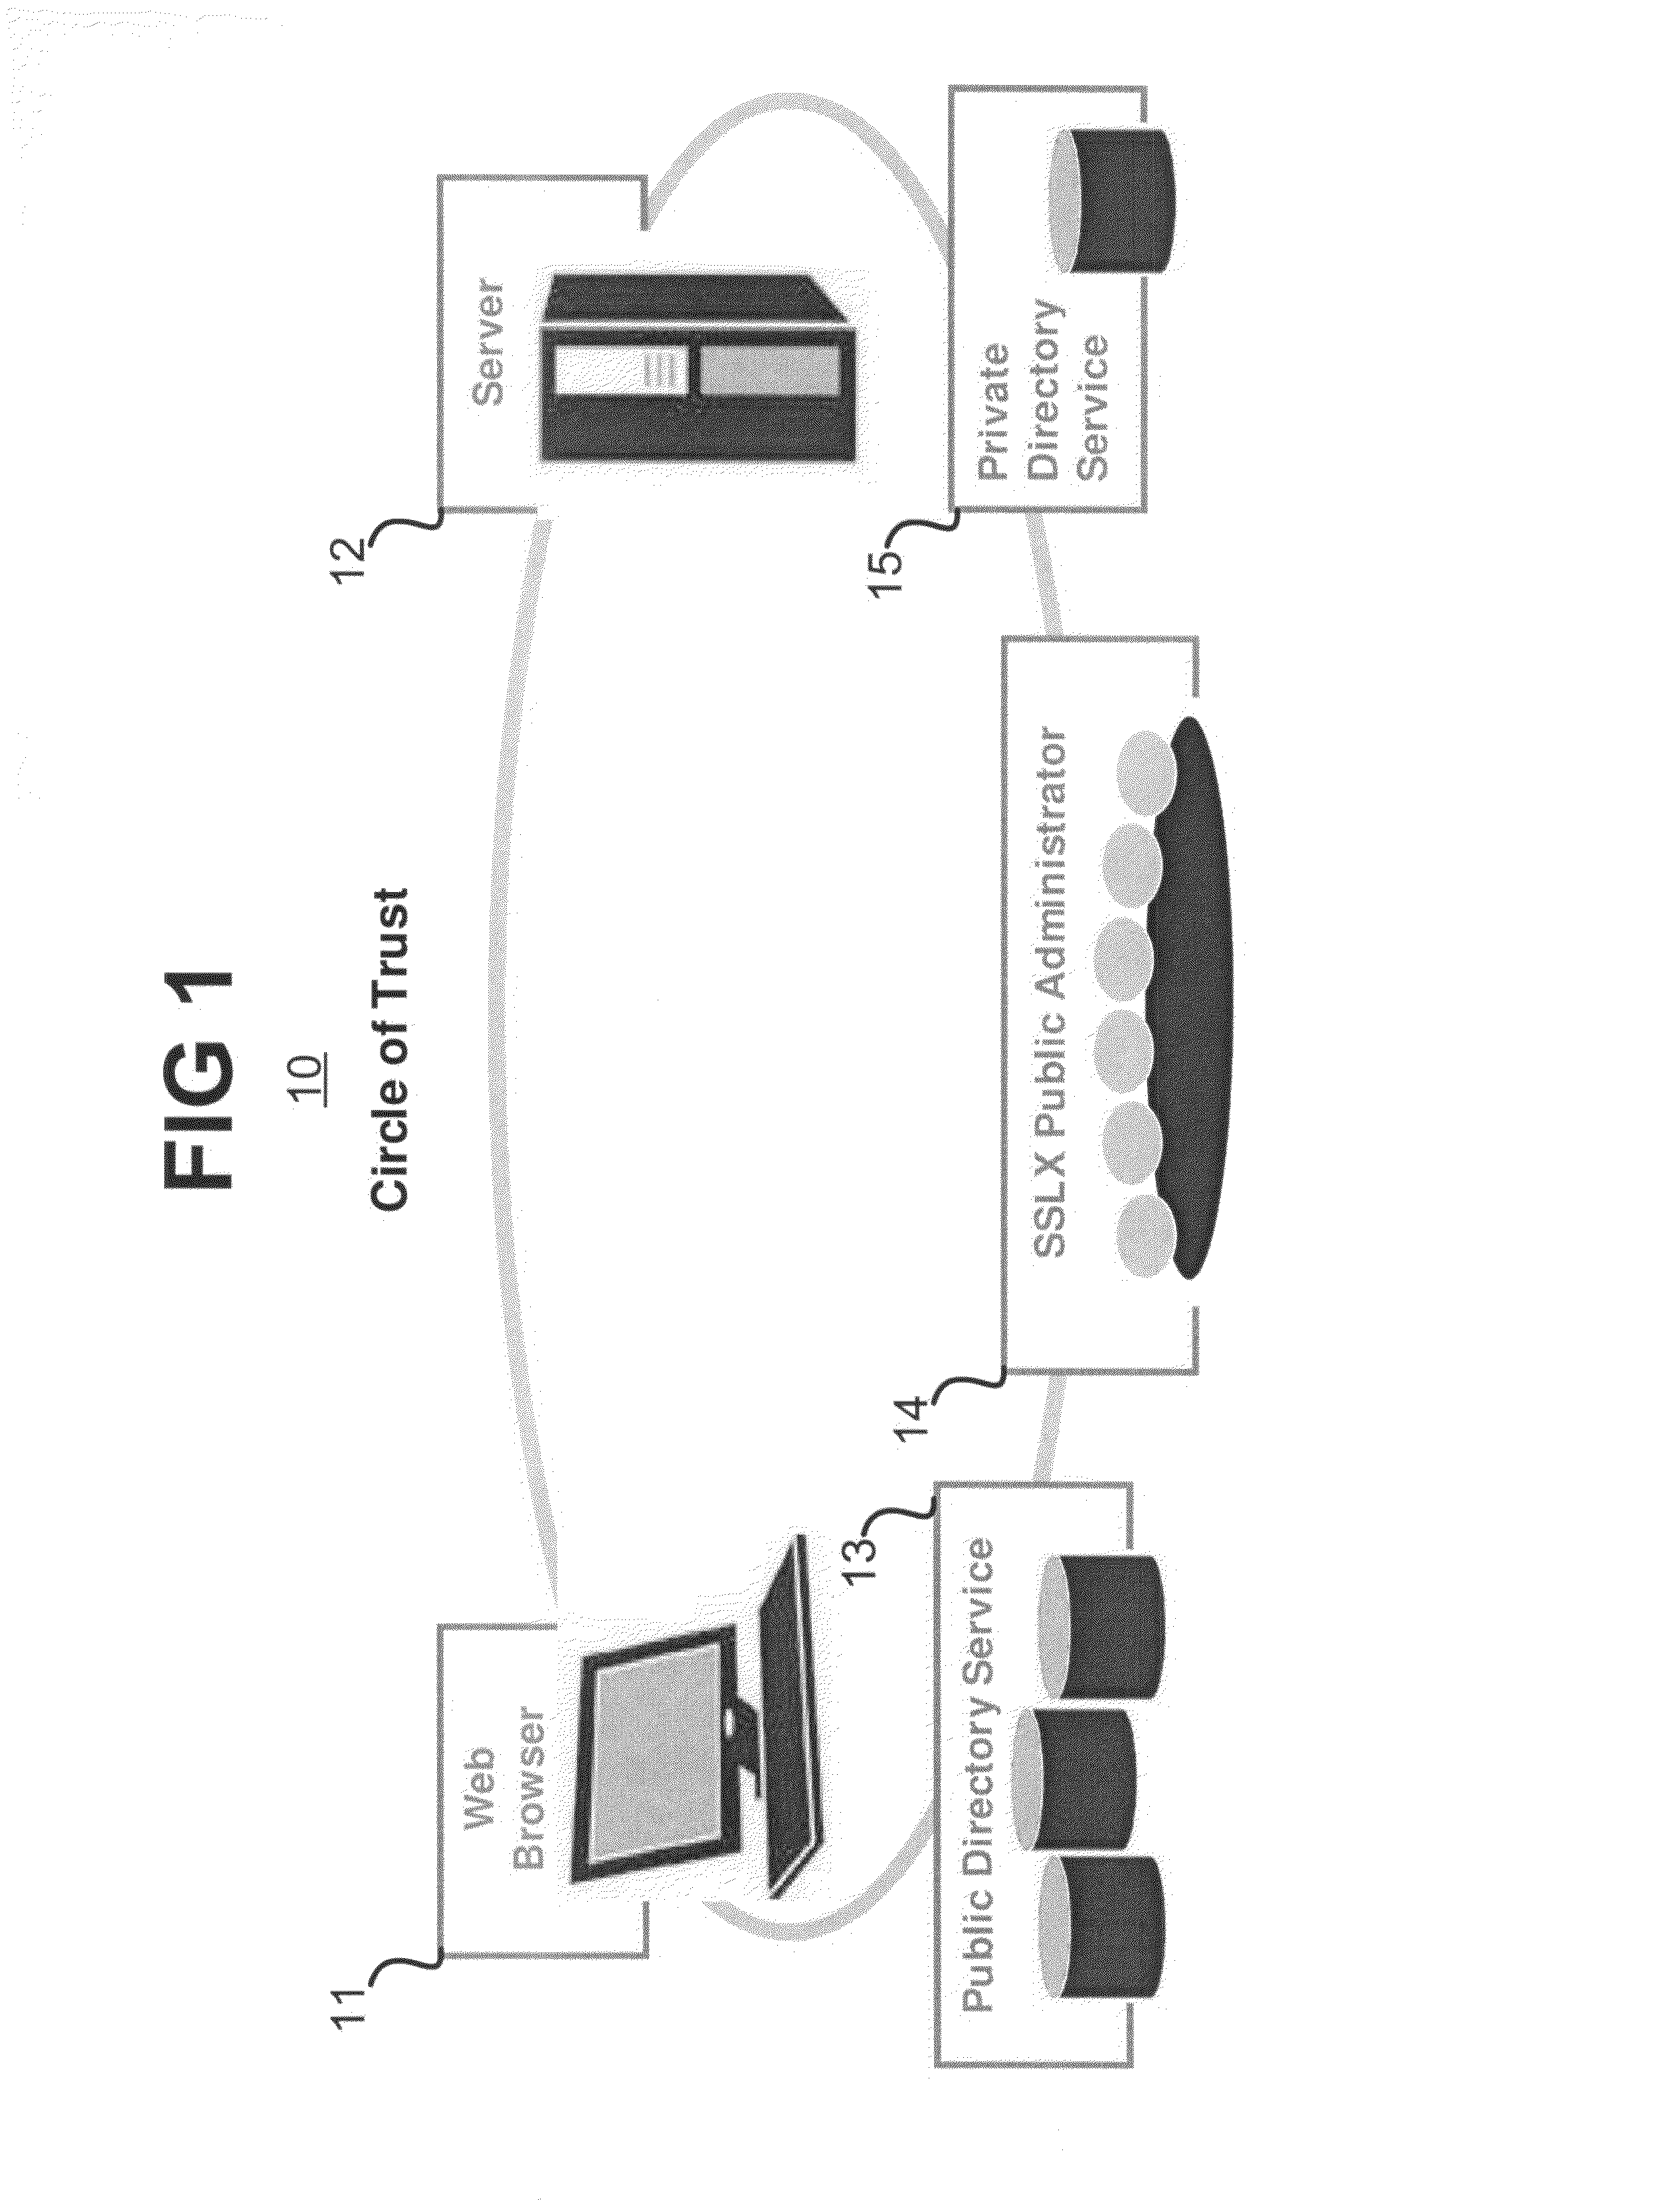 Method and system for establishing real-time authenticated and secured communications channels in a public network